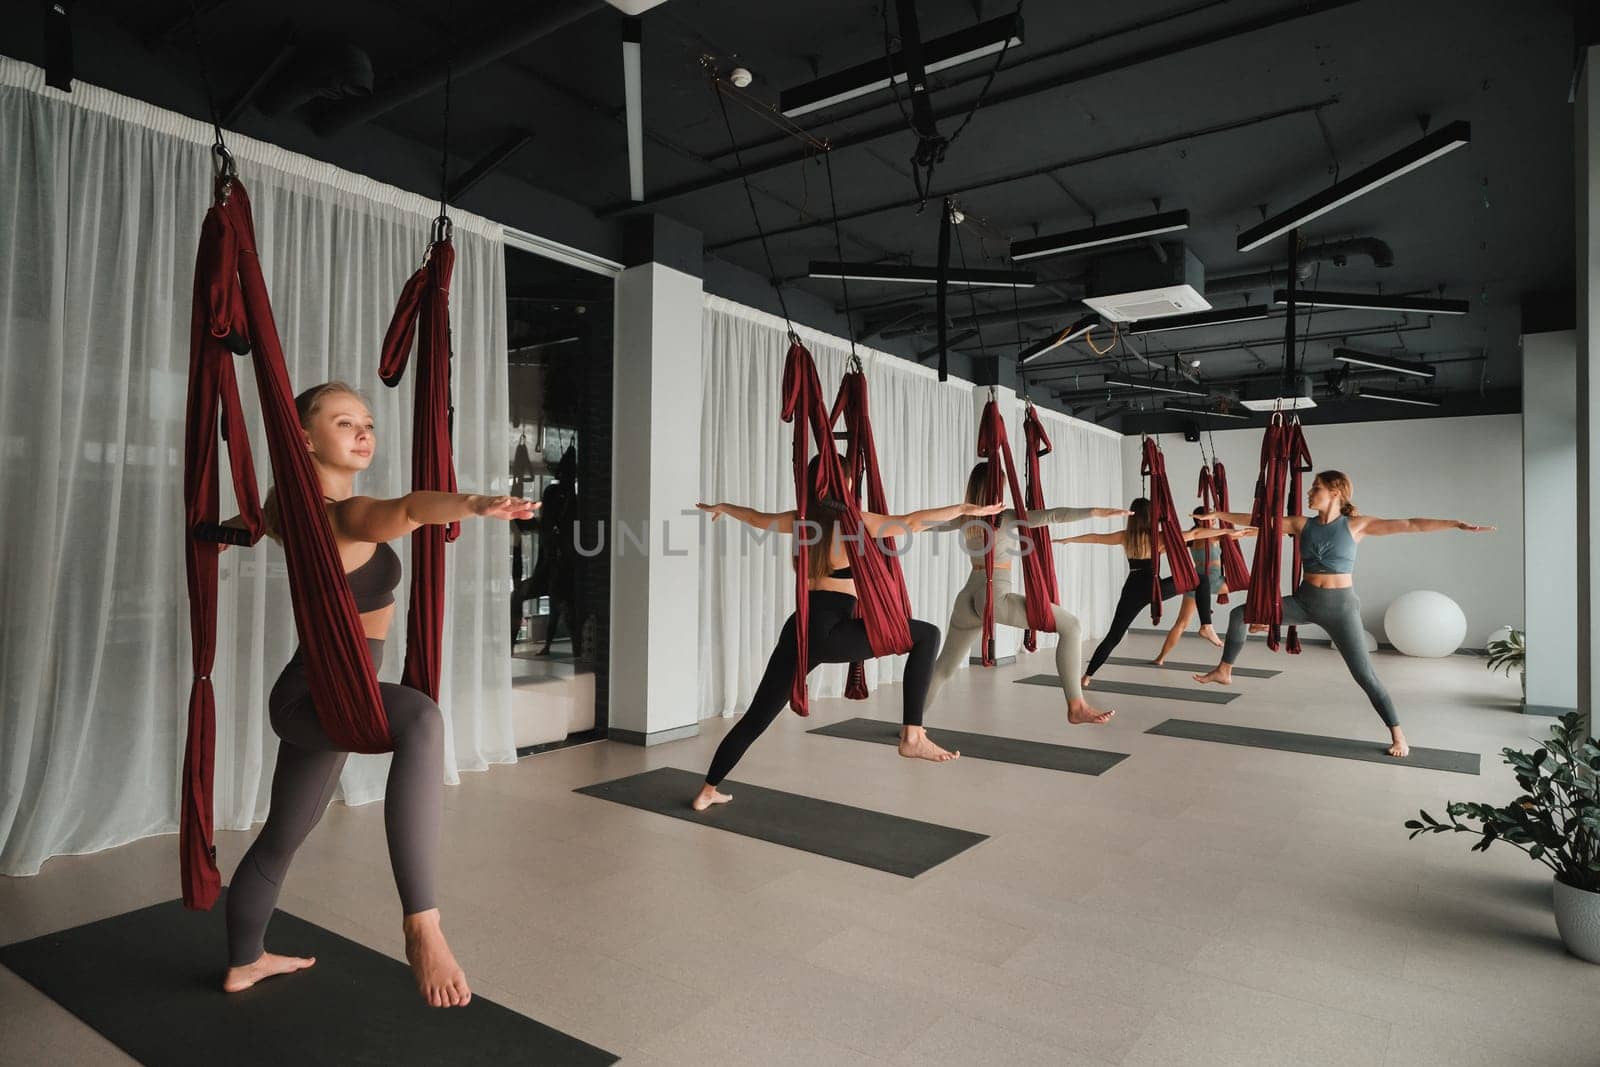 A group of women play sports on hanging hammocks. Fly yoga in the gym.